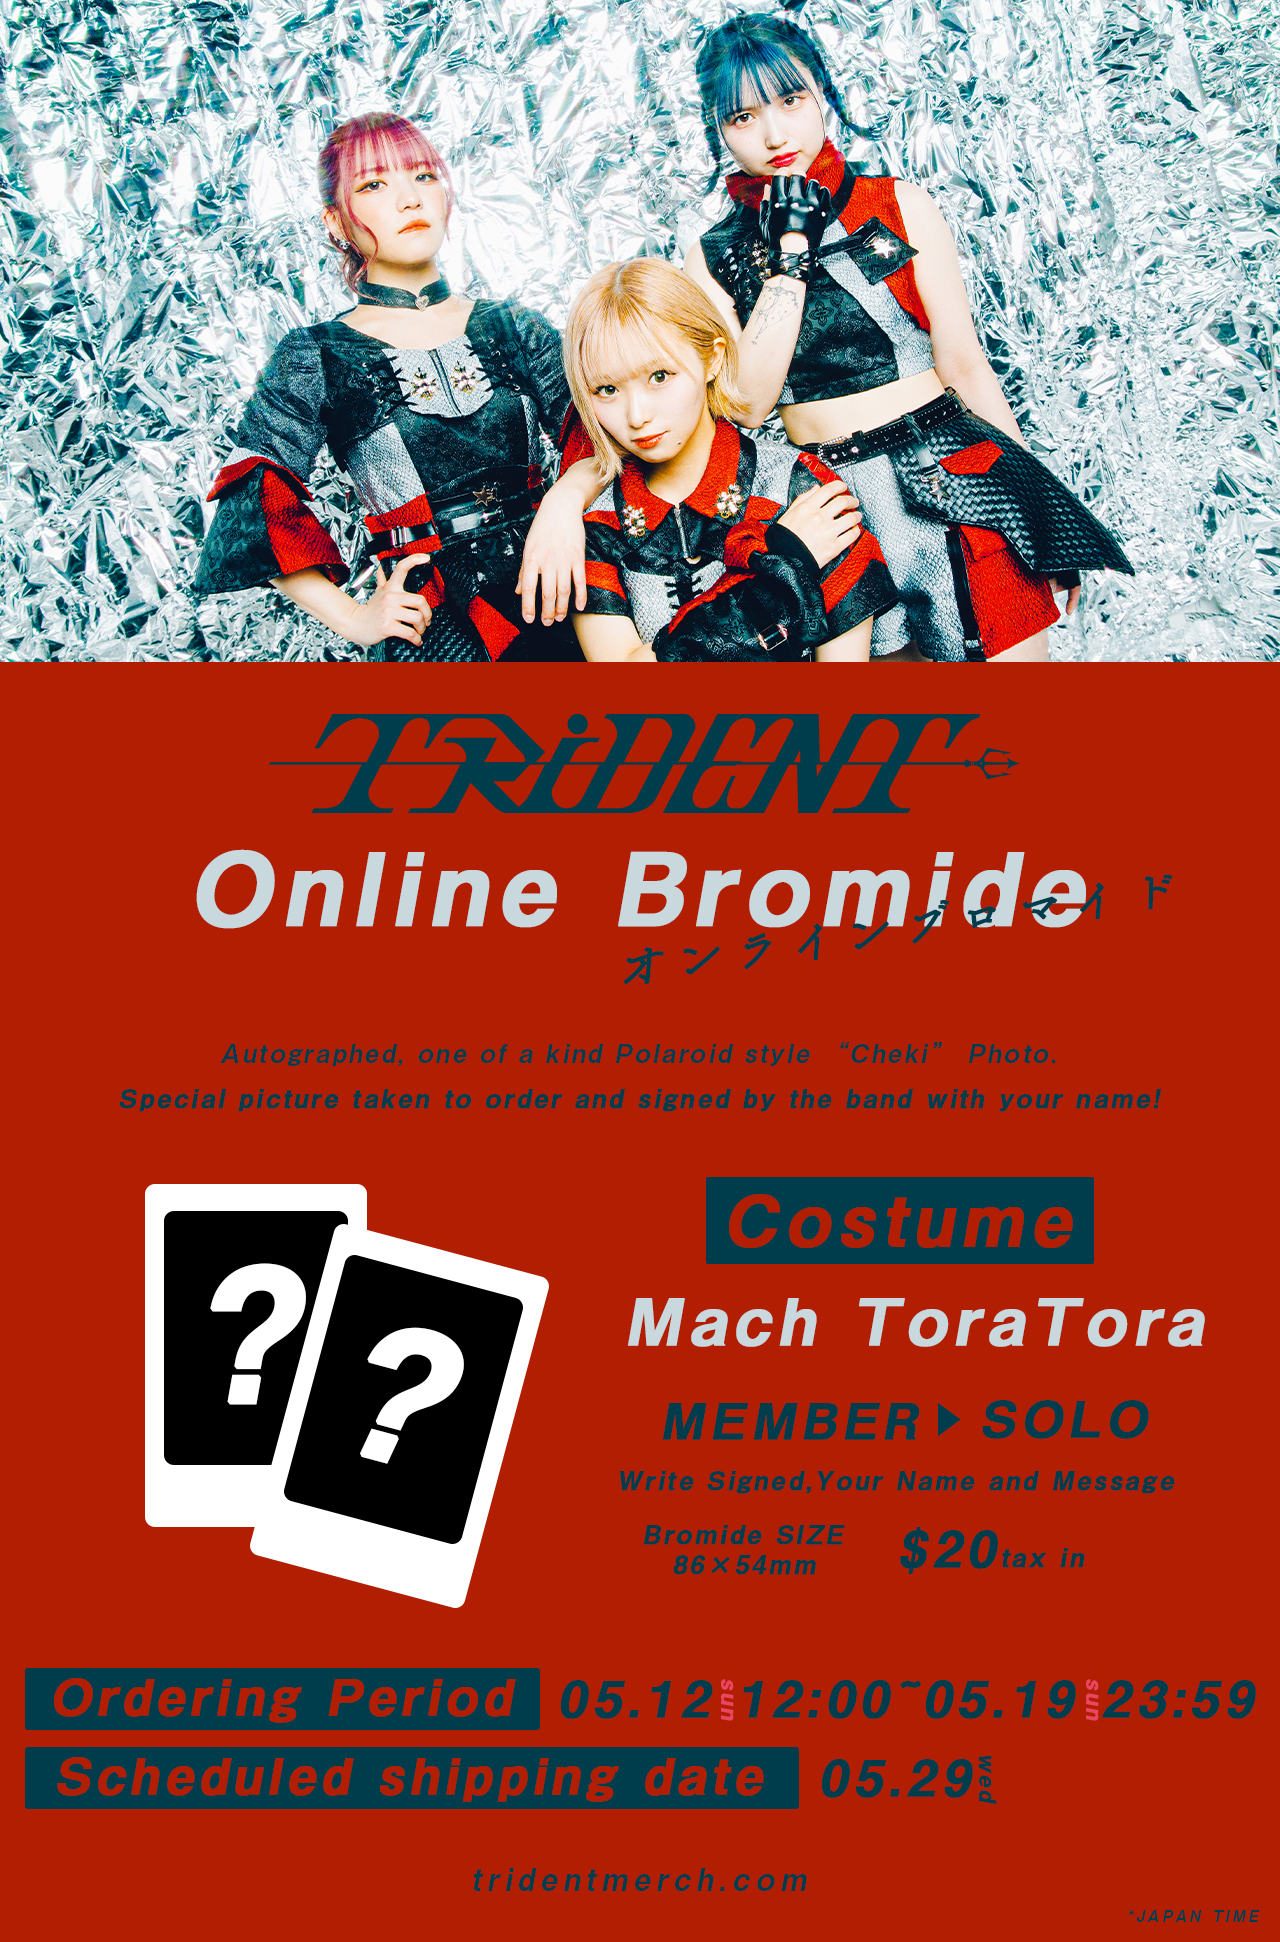 TRiDENT "ONLINE BROMIDE" Autographed Polaroid Style Photo (With Your Custom Name) - Individual Member